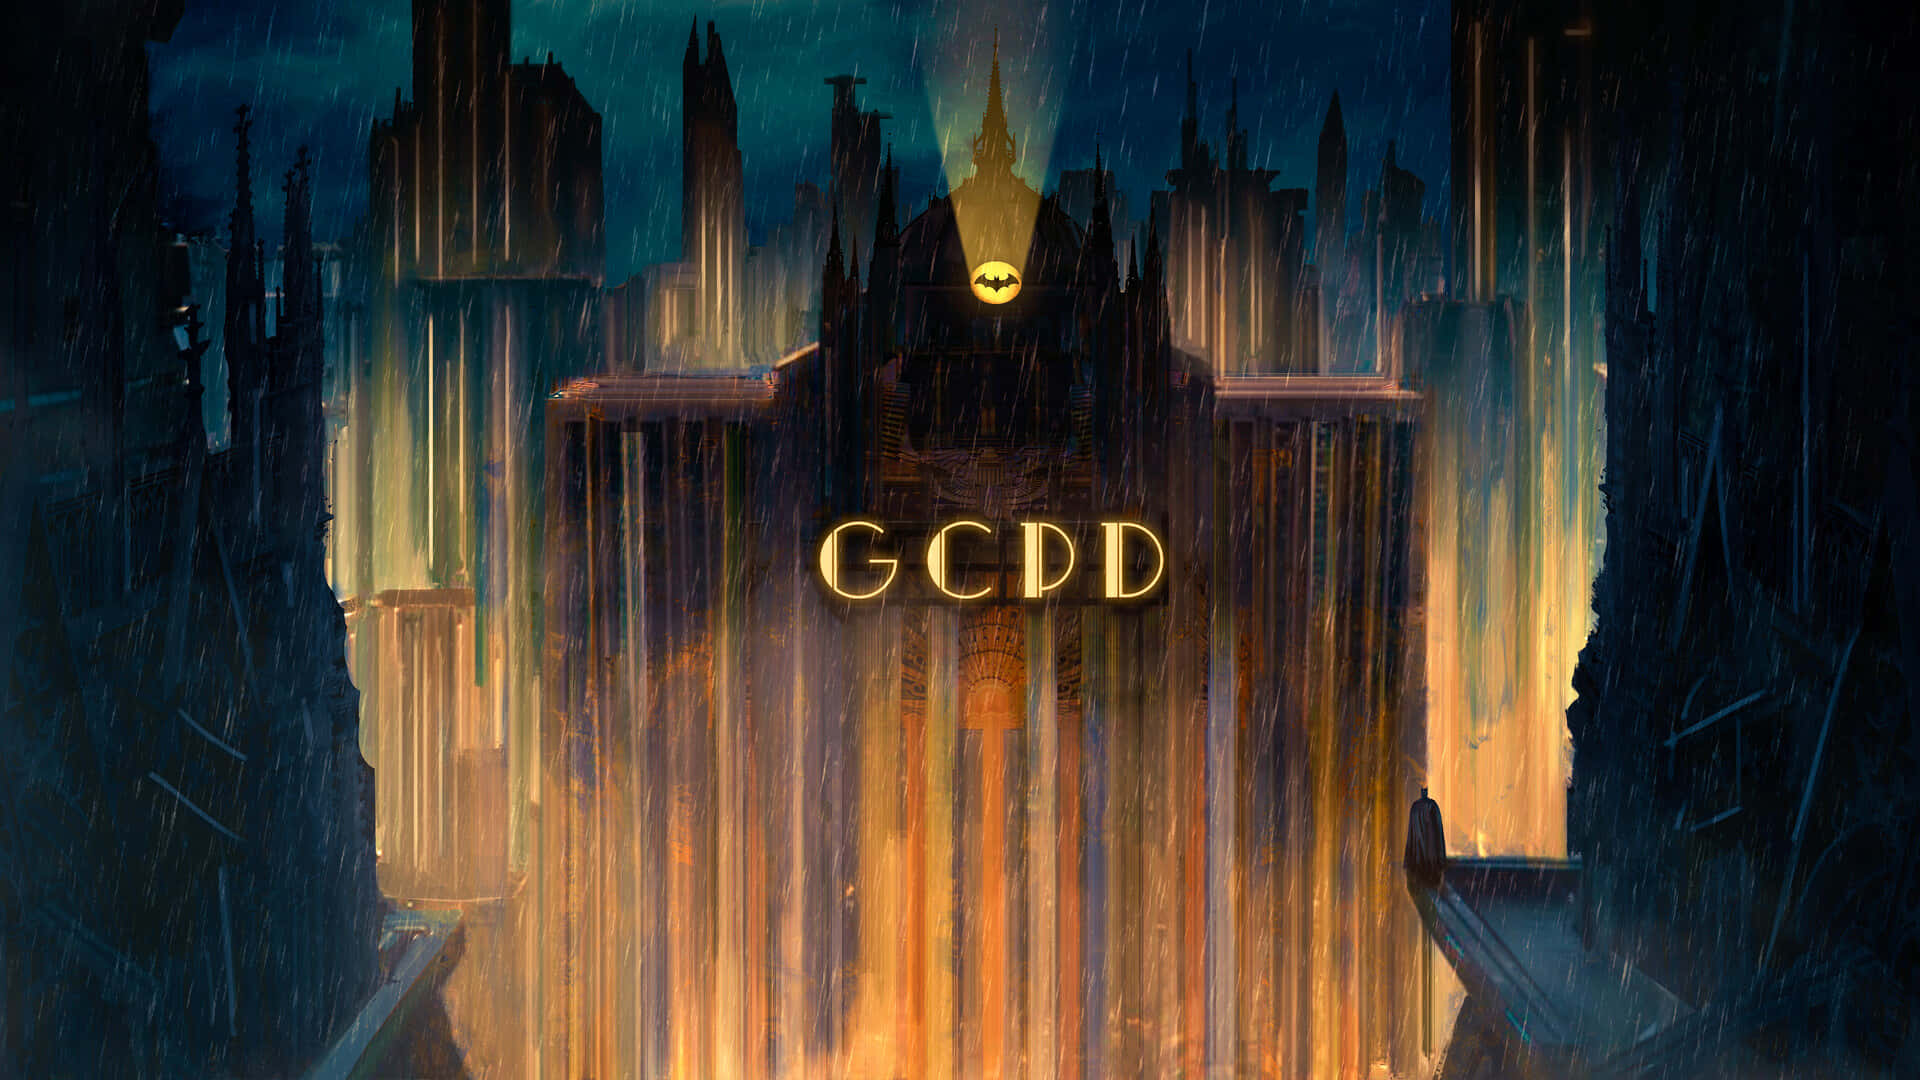 Nighttime at Gotham City Police Department Wallpaper